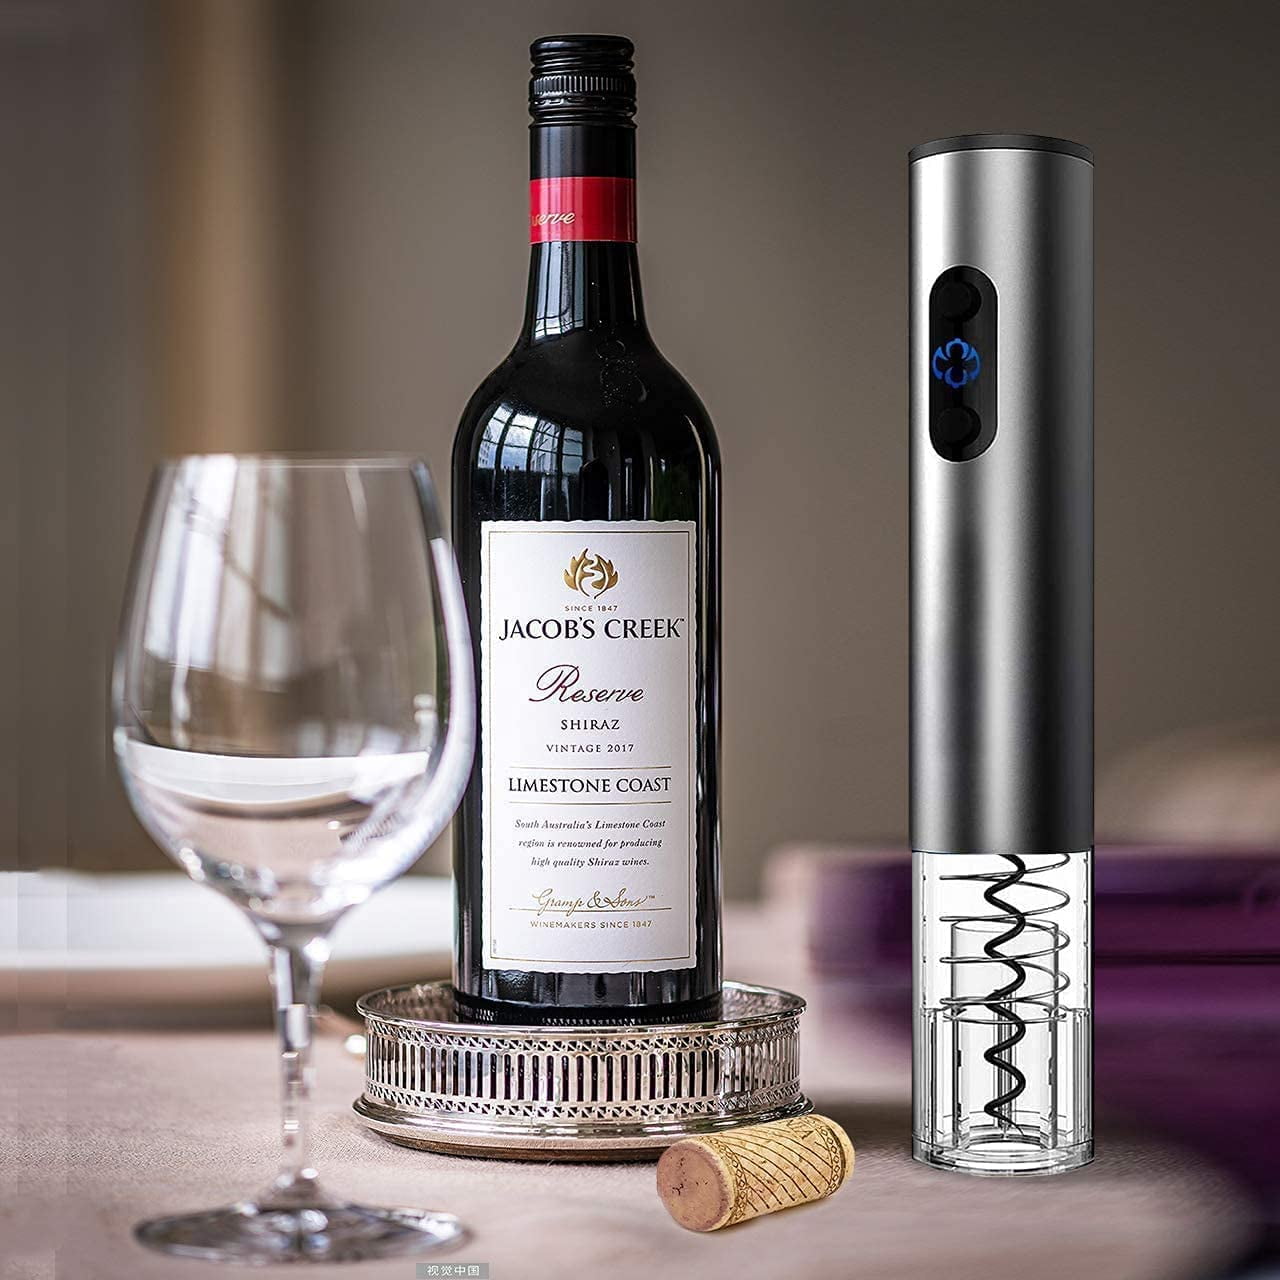 Electric Bottle Opener for Red Wine Foil Cutter Automatic Red Wine